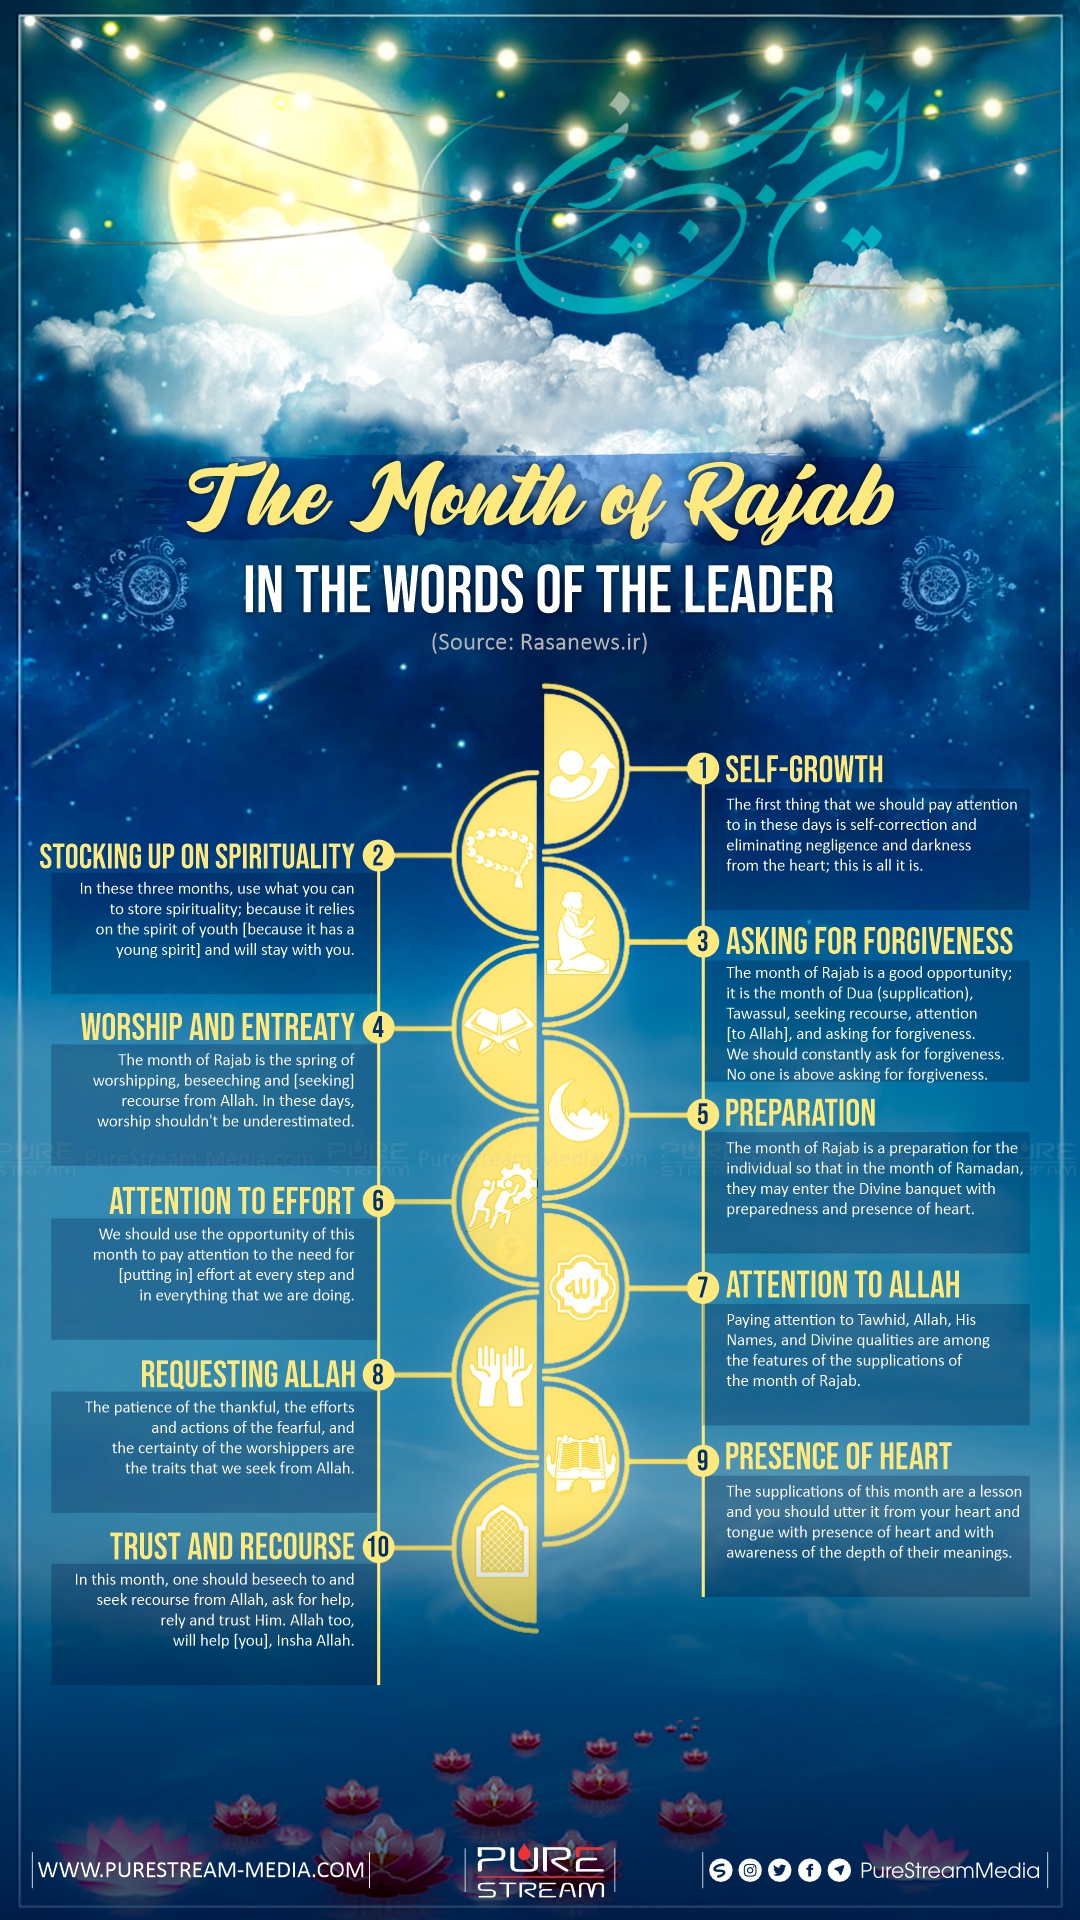 The Month of Rajab in the Words of the Leader.